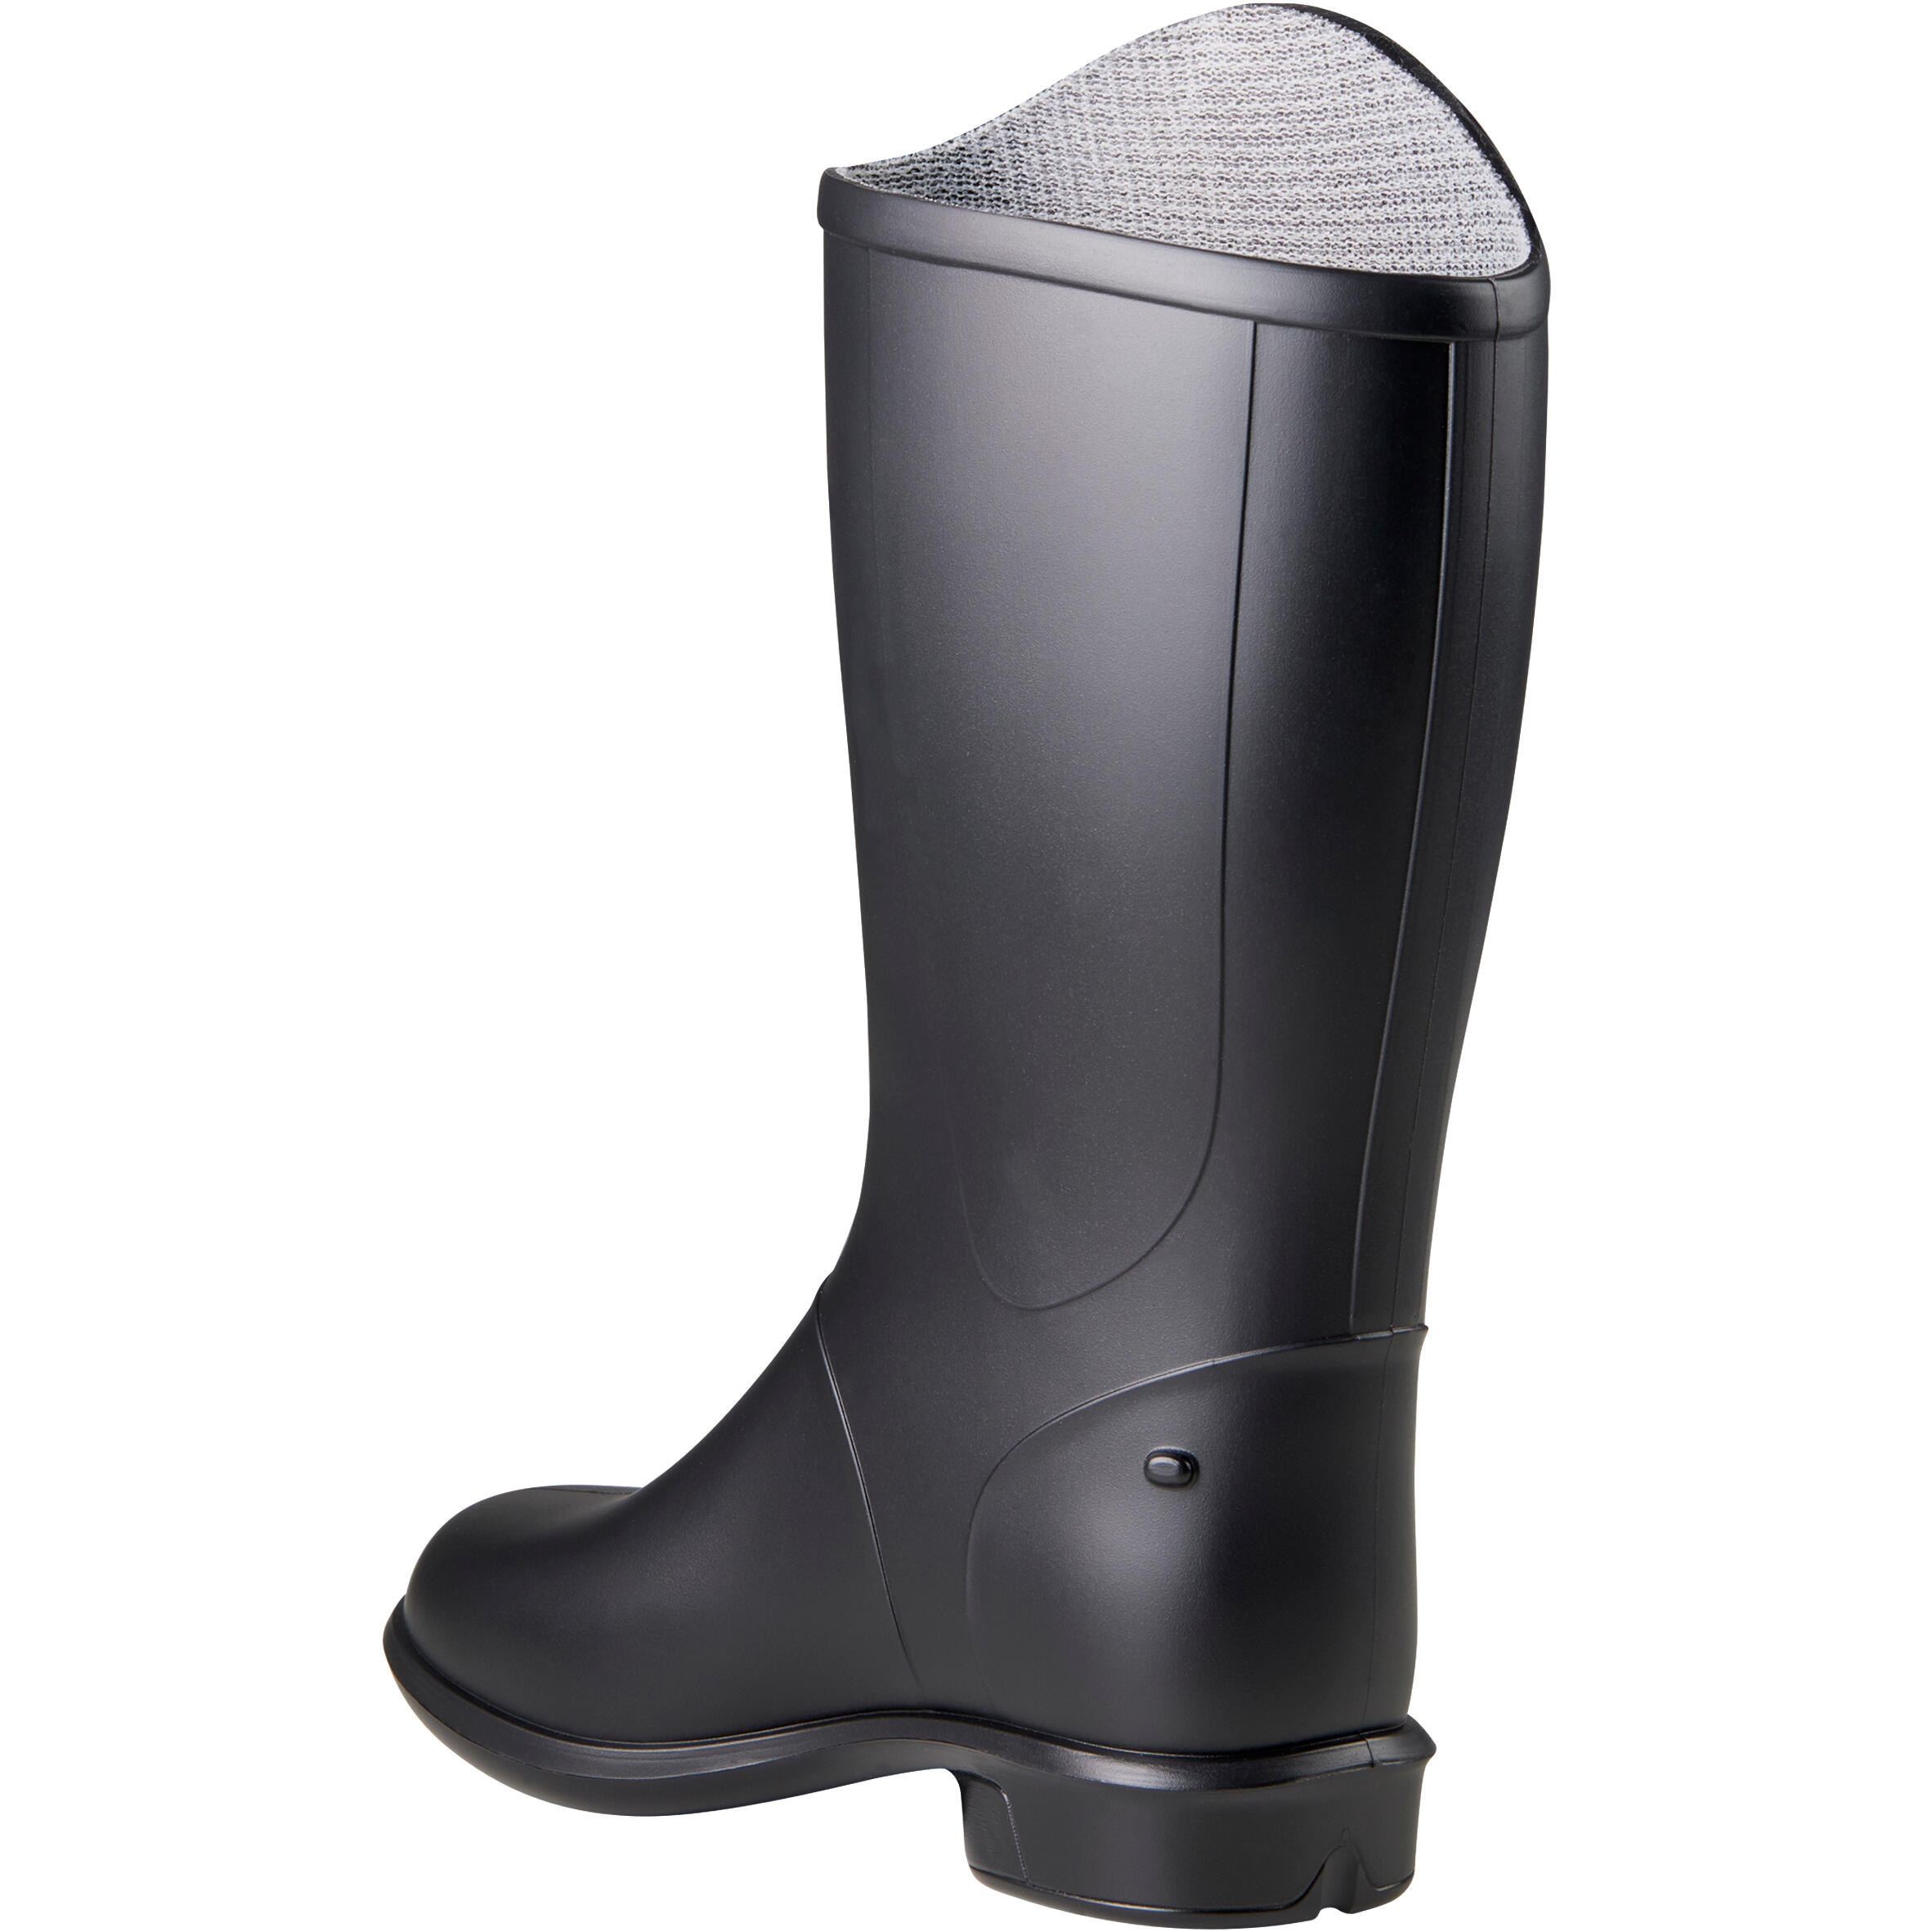 100 Baby Horse Riding Boots - Black 2/14